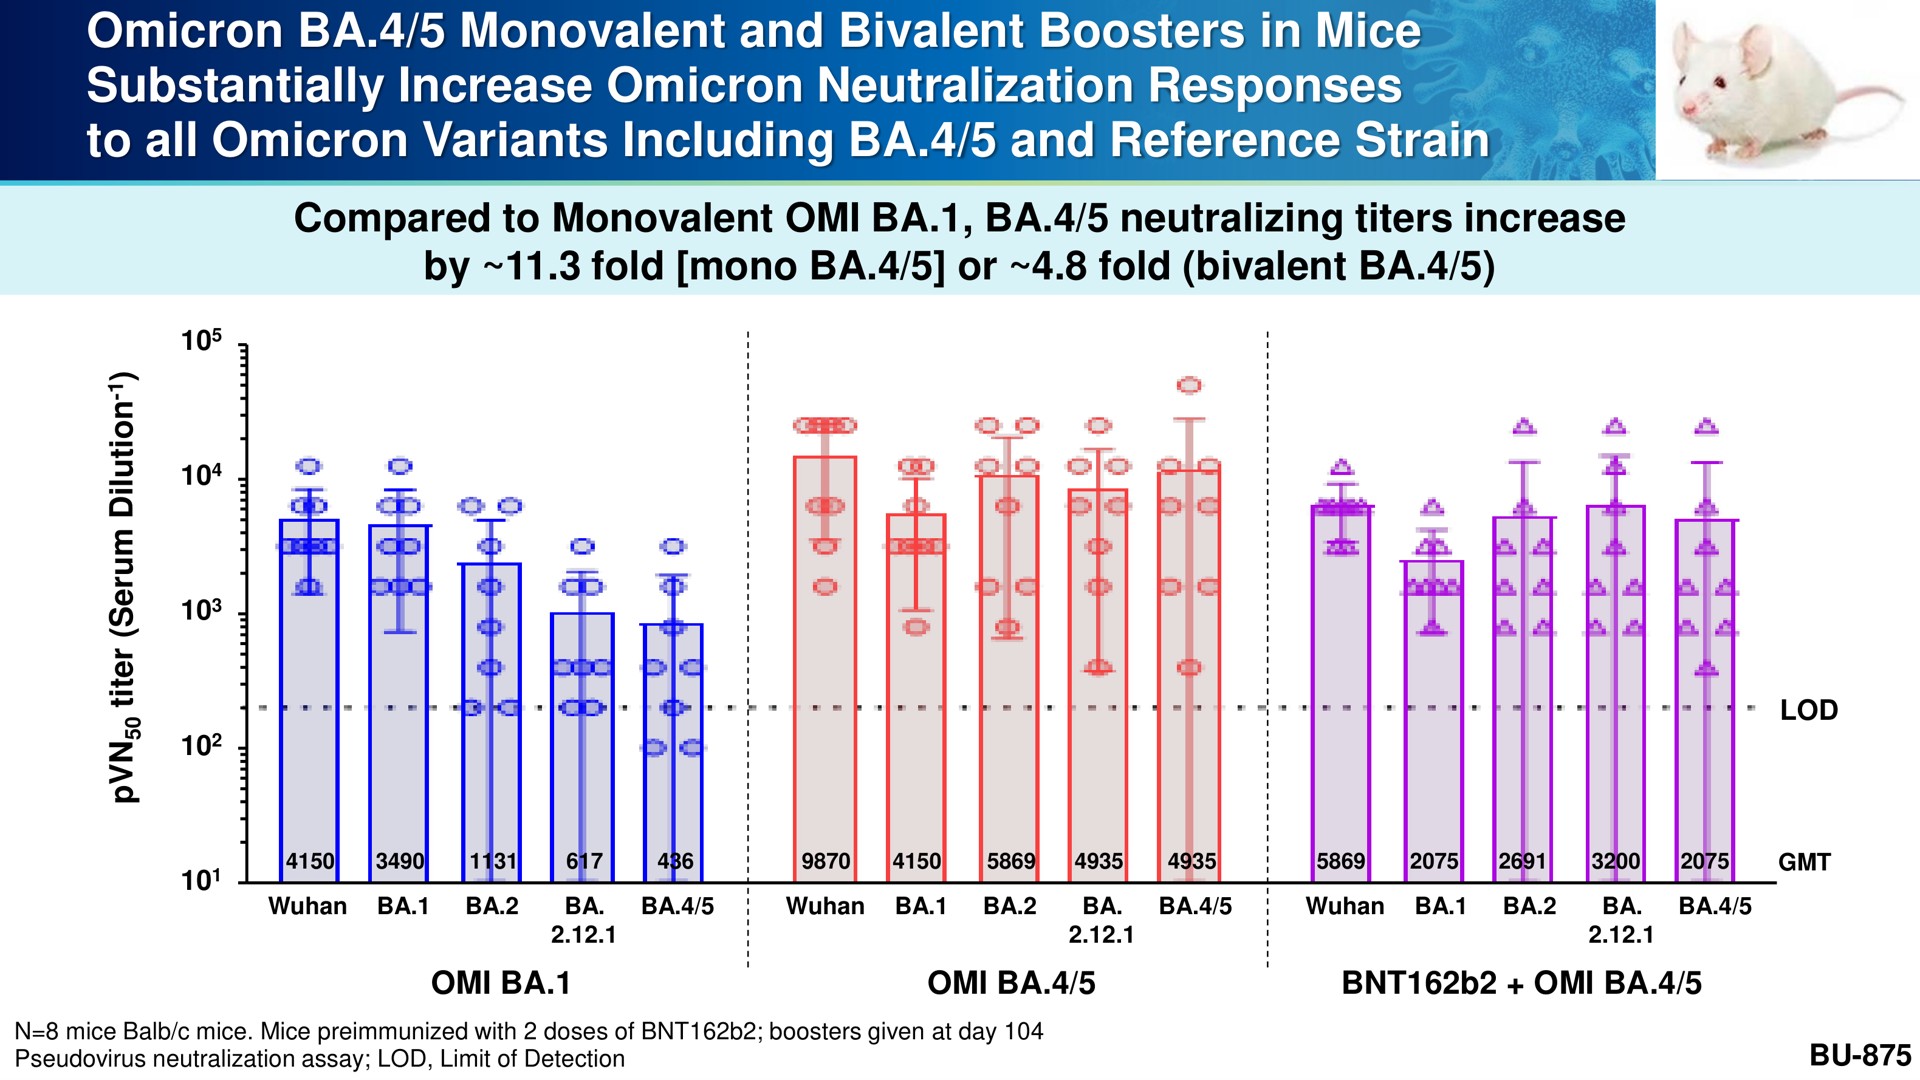 omicron monovalent and bivalent boosters in mice substantially increase omicron neutralization responses to all omicron variants including and reference strain a | BioNTech